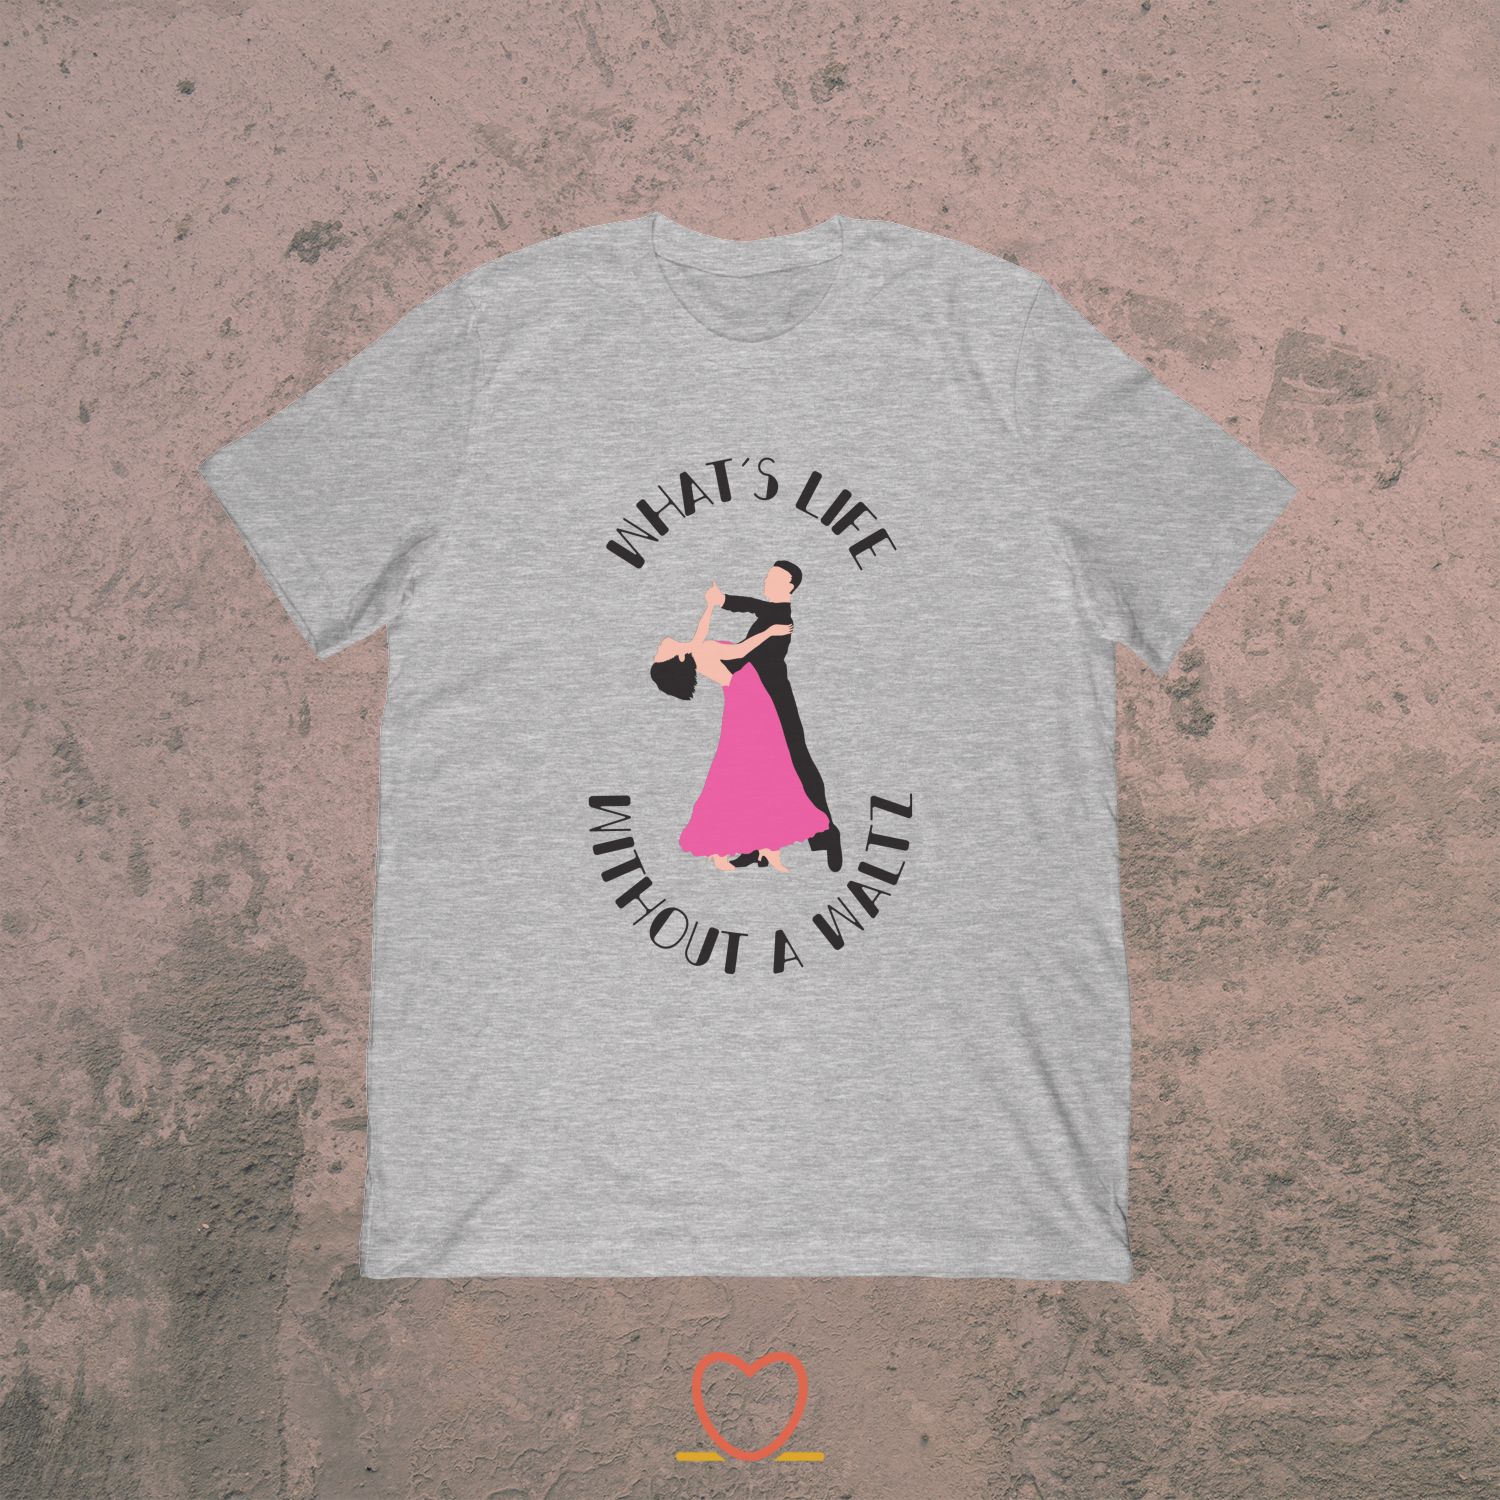 What’s Life Without A Waltz – Ballroom Dancing Tee